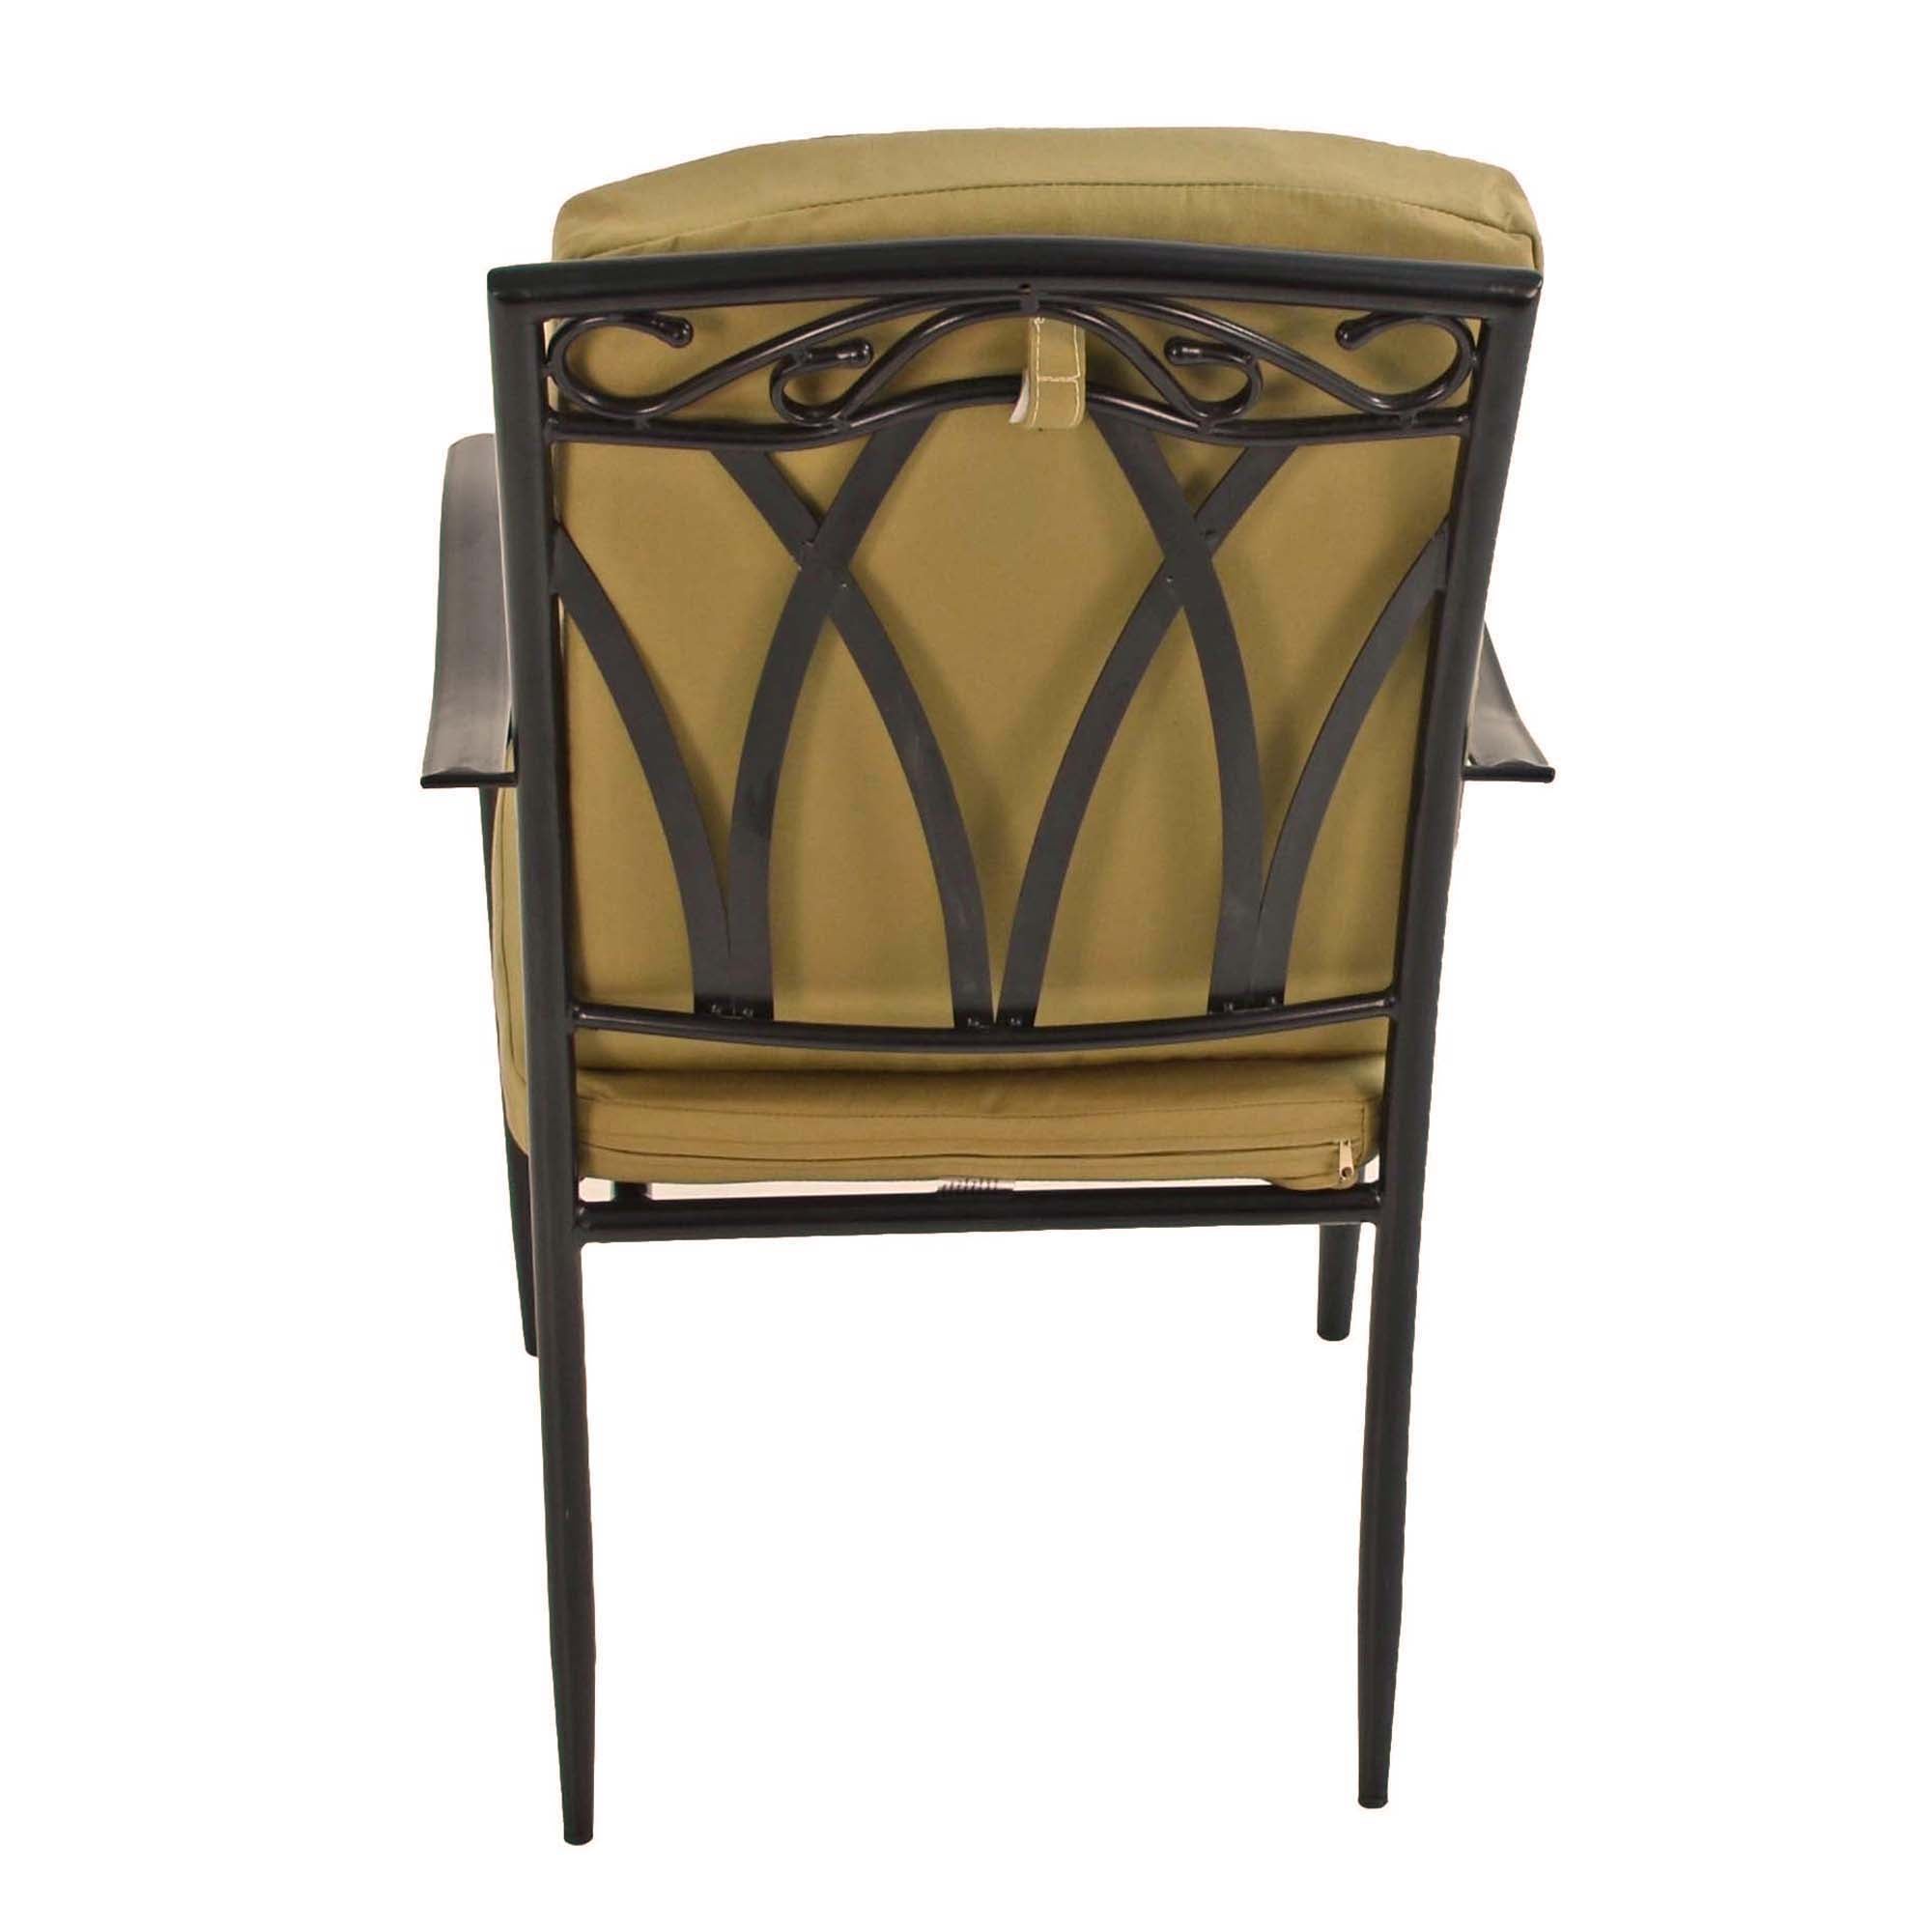 Byron Manor Ascot Garden Dining Chair (Pack of 2) Chairs Byron Manor   